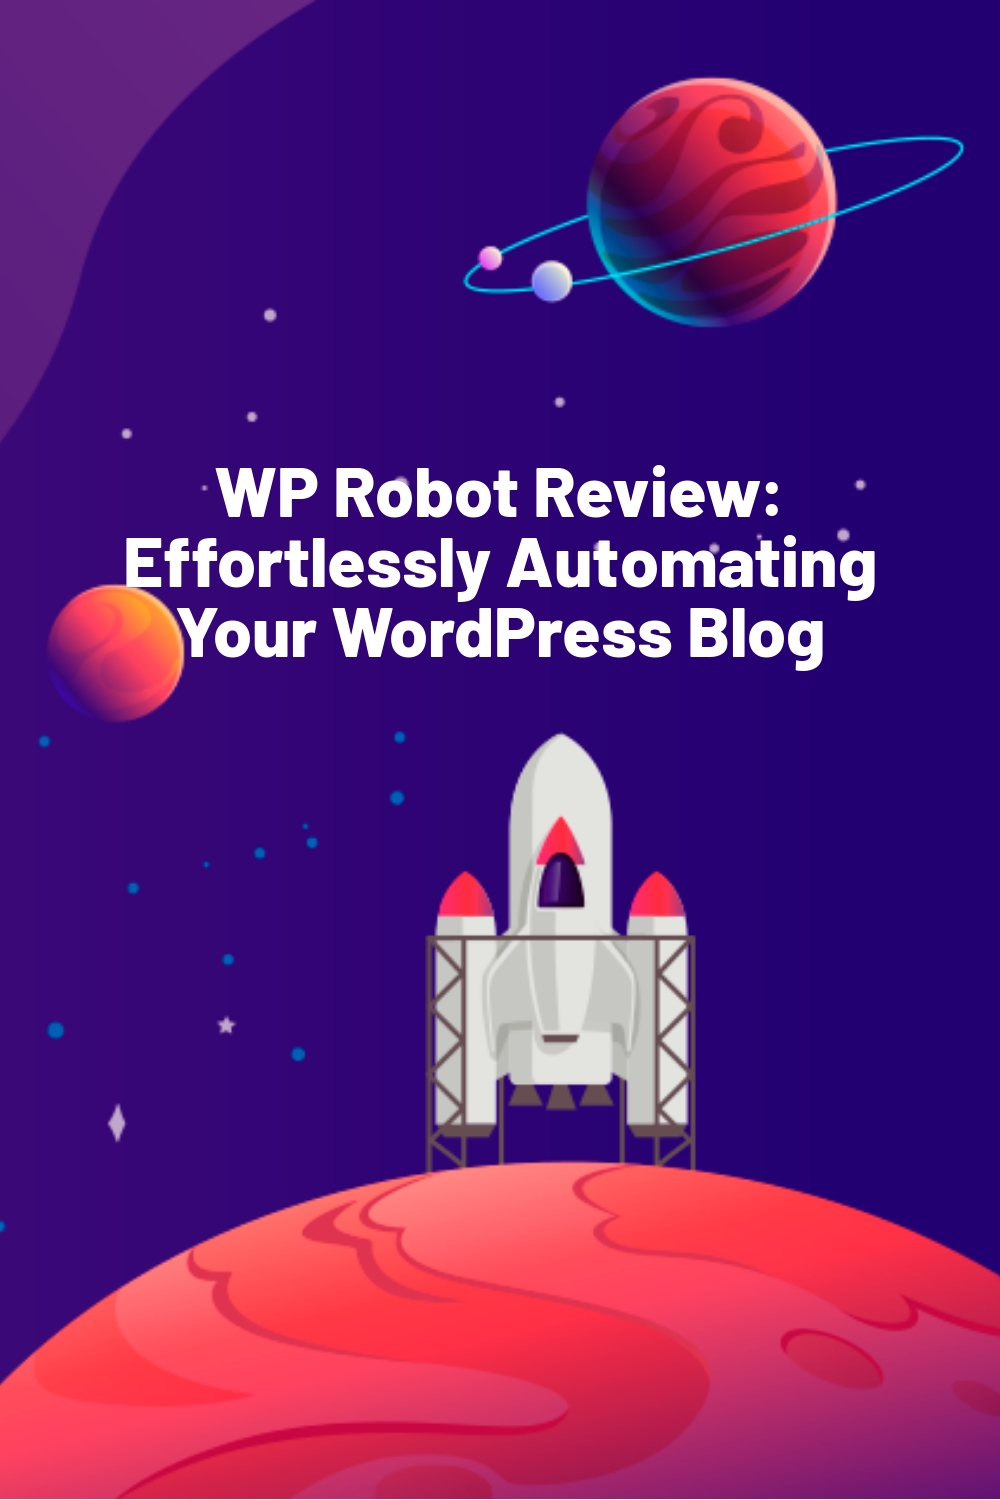 WP Robot Review: Effortlessly Automating Your WordPress Blog